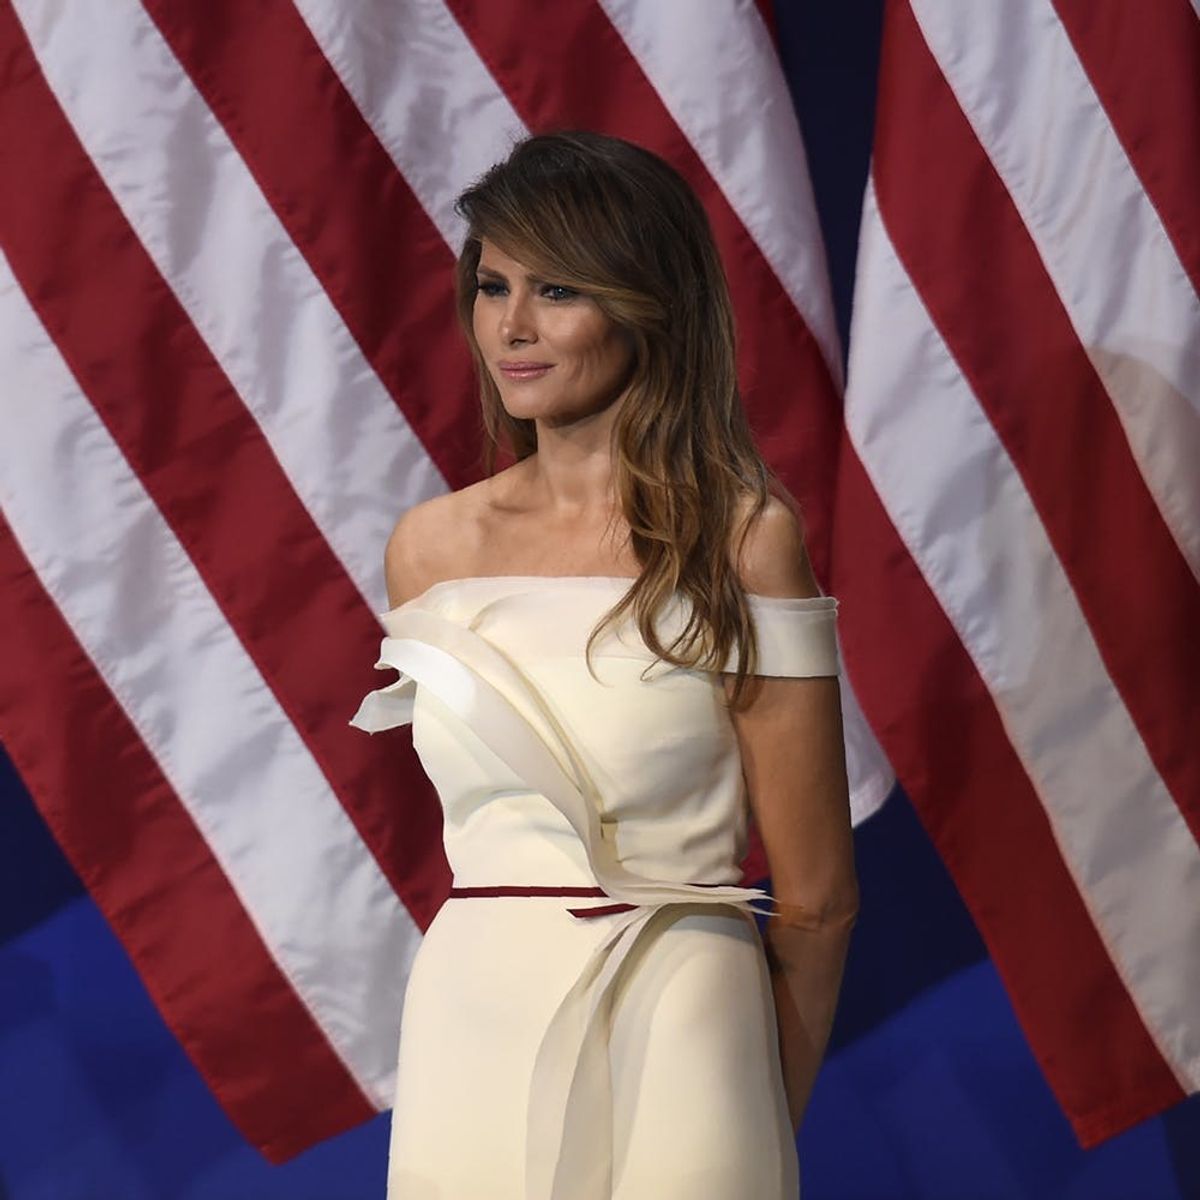 Melania Trump Didn’t Want a “First Lady Gown” for Inauguration Ball